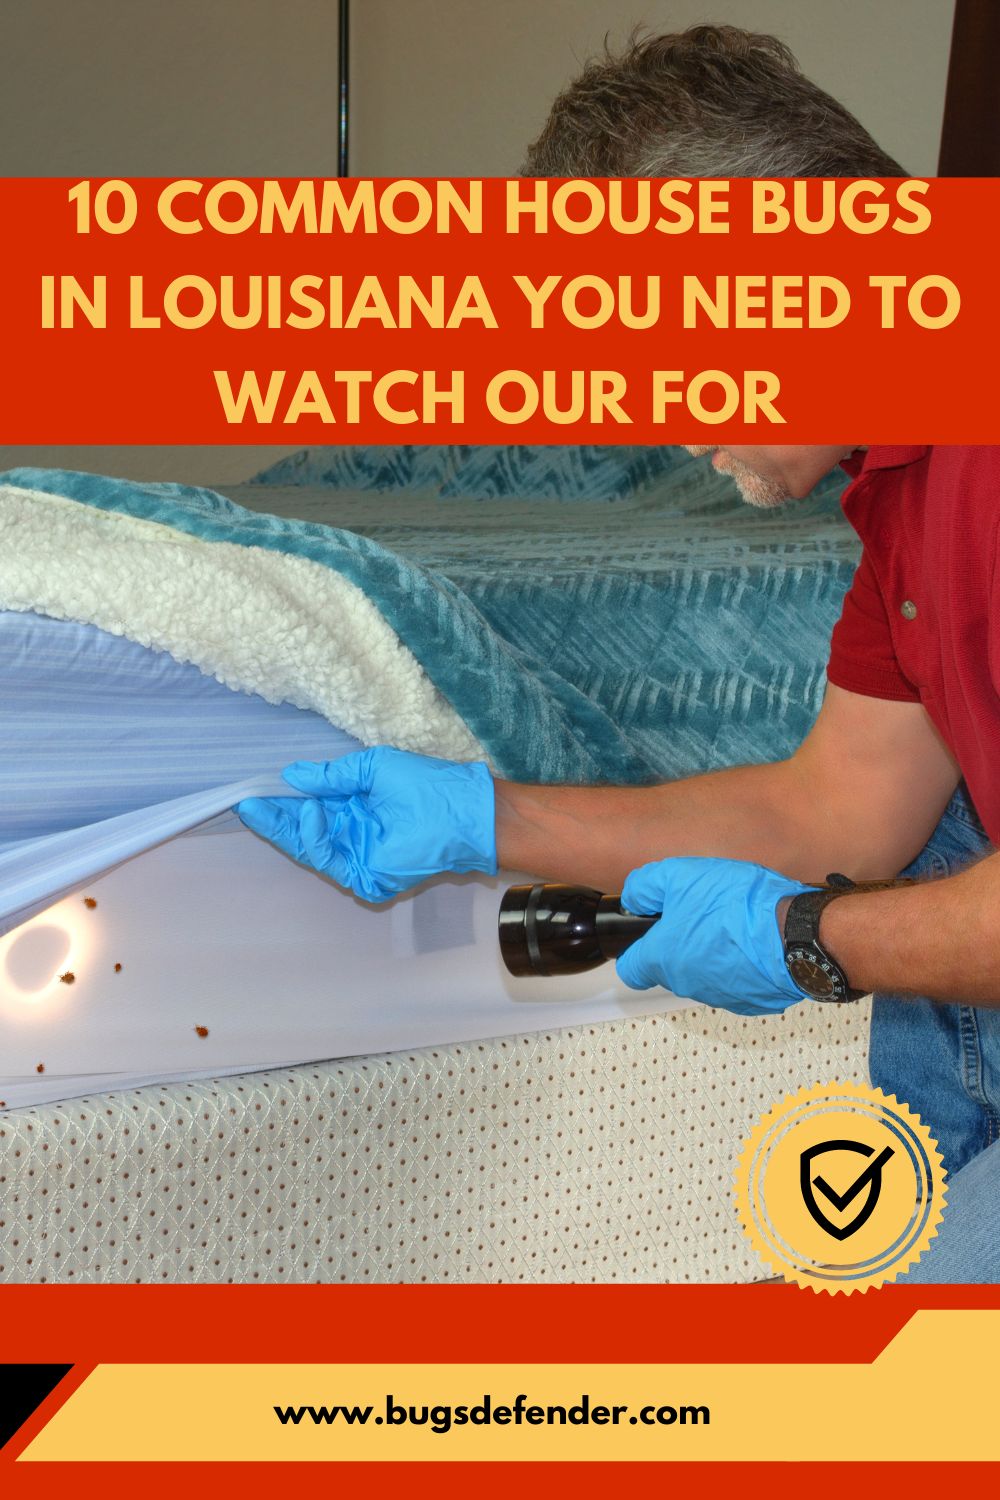 10 Common House Bugs In Louisiana You Need To Watch Our For pin 2